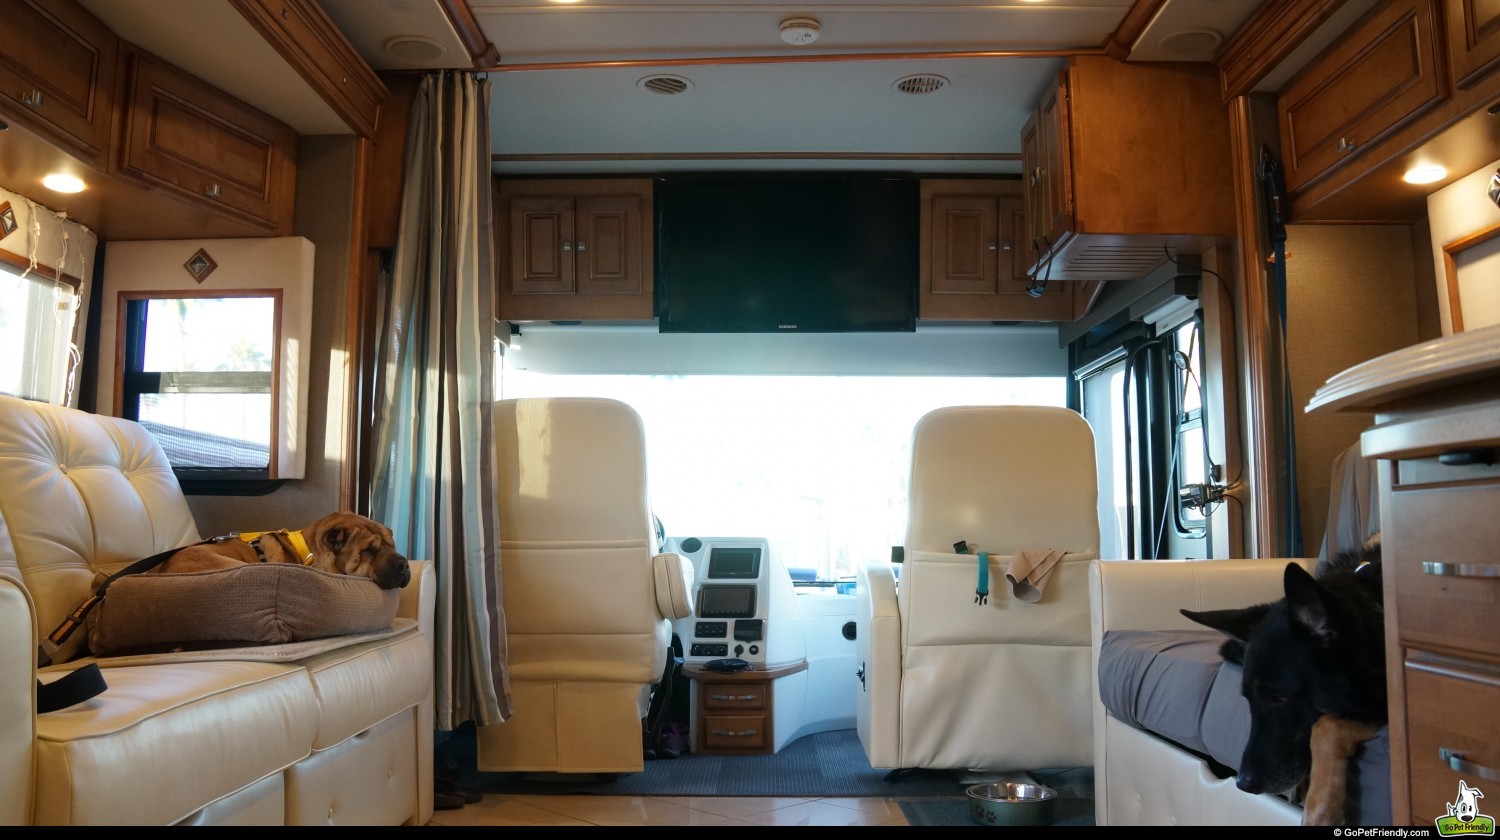 Curtain in Meridian to keep dog from barking while driving the RV